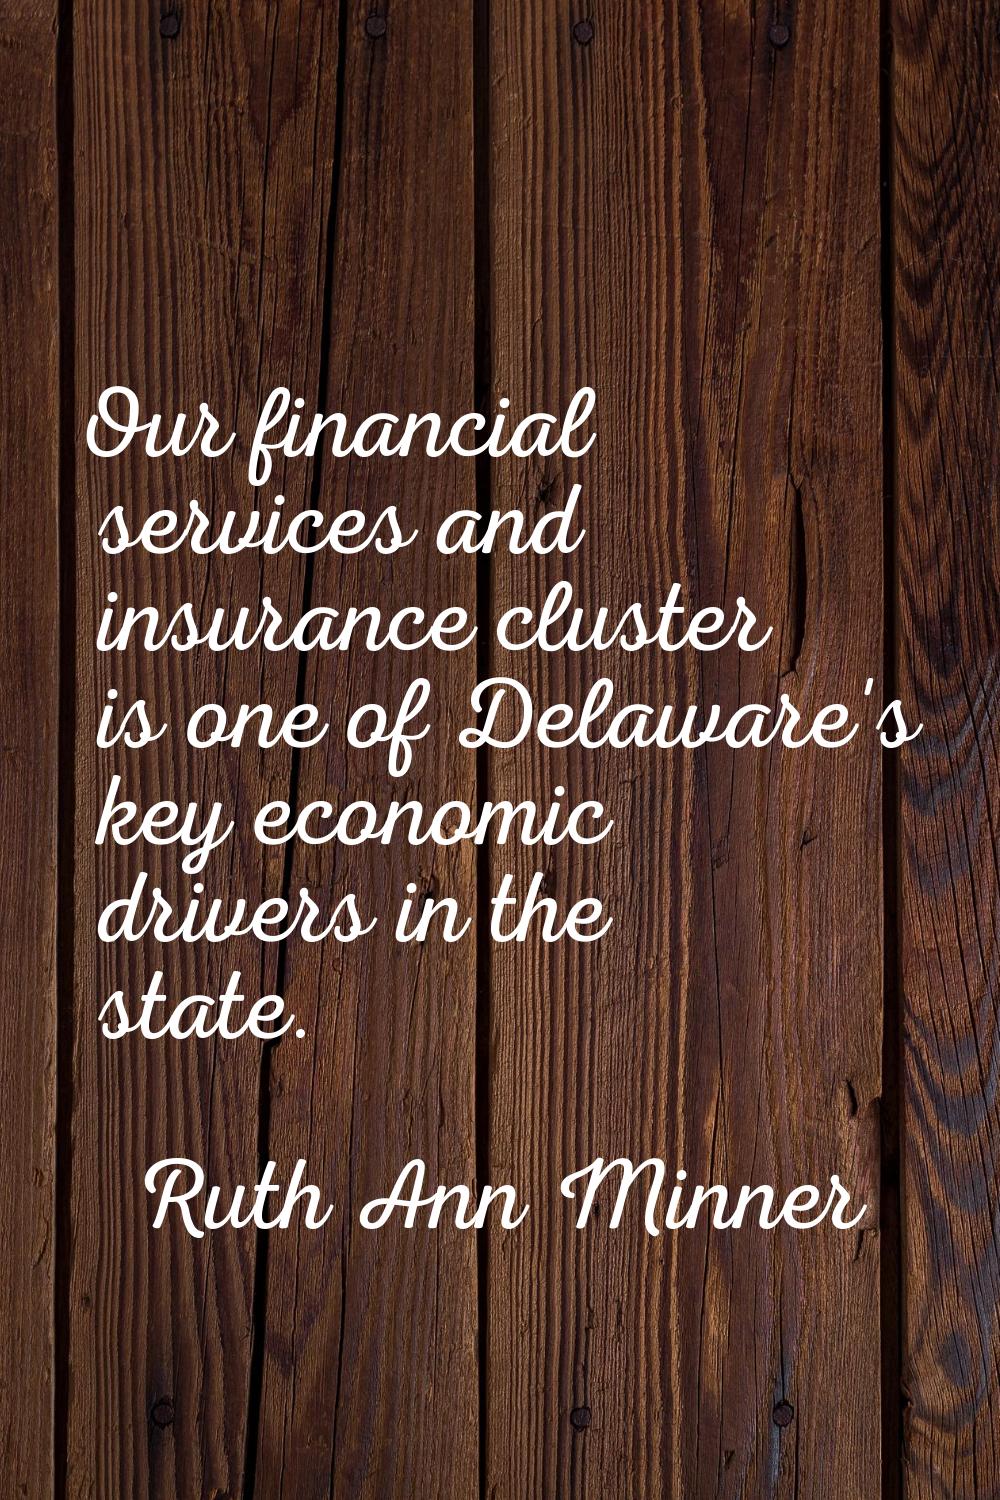 Our financial services and insurance cluster is one of Delaware's key economic drivers in the state